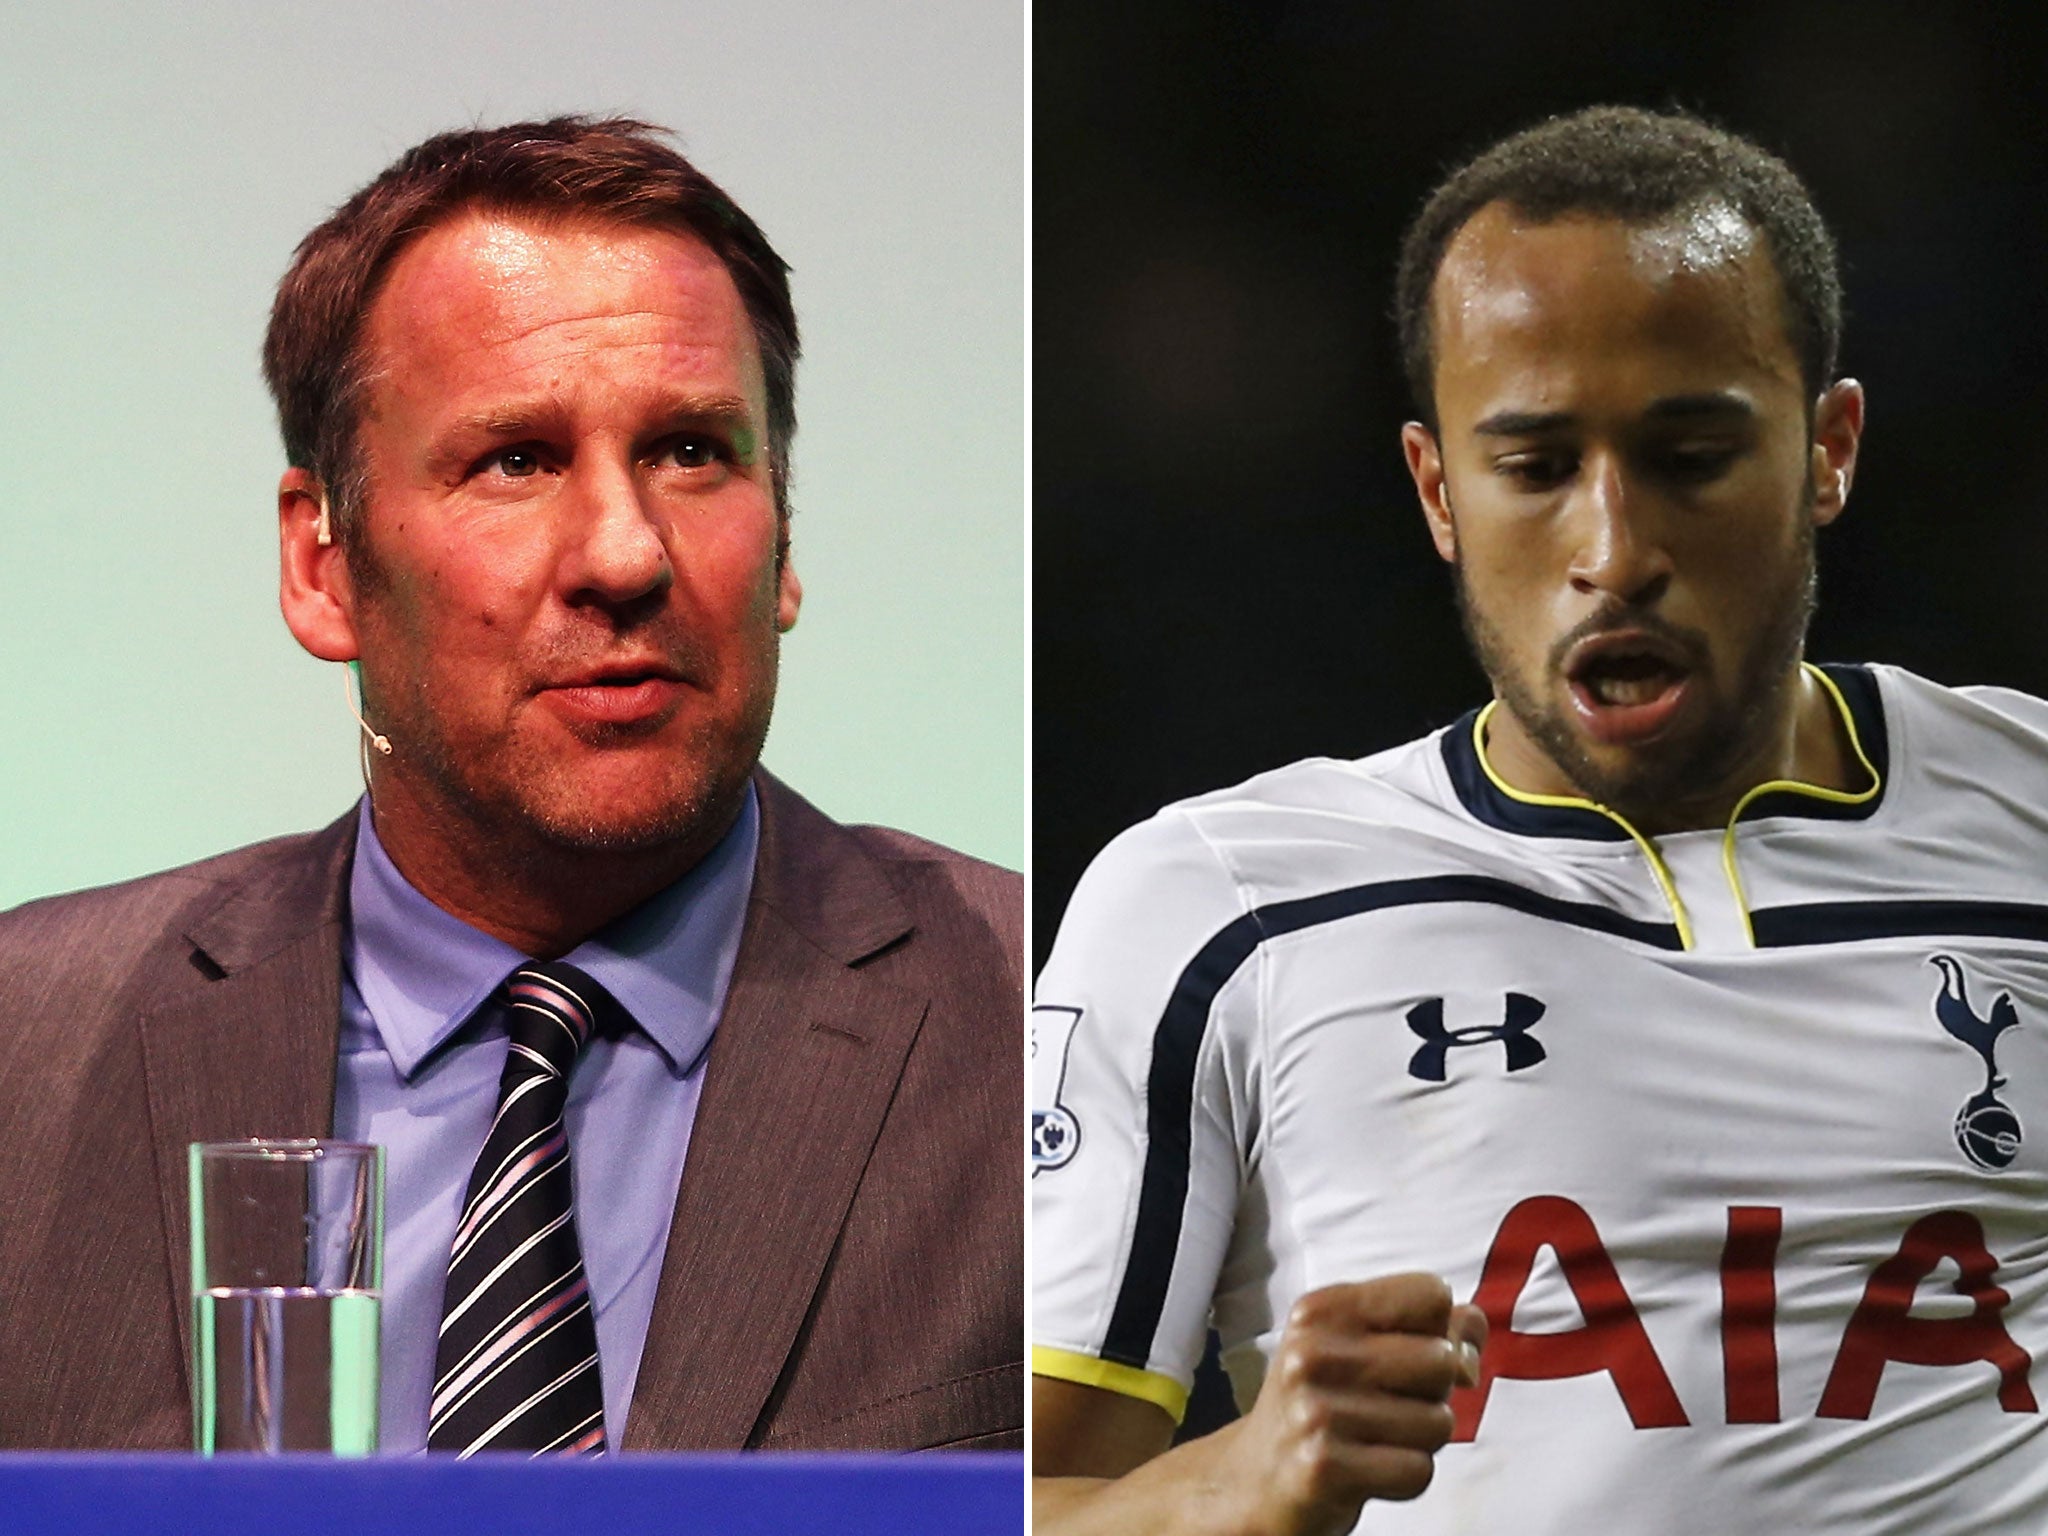 Paul Merson (left) and Andros Townsend